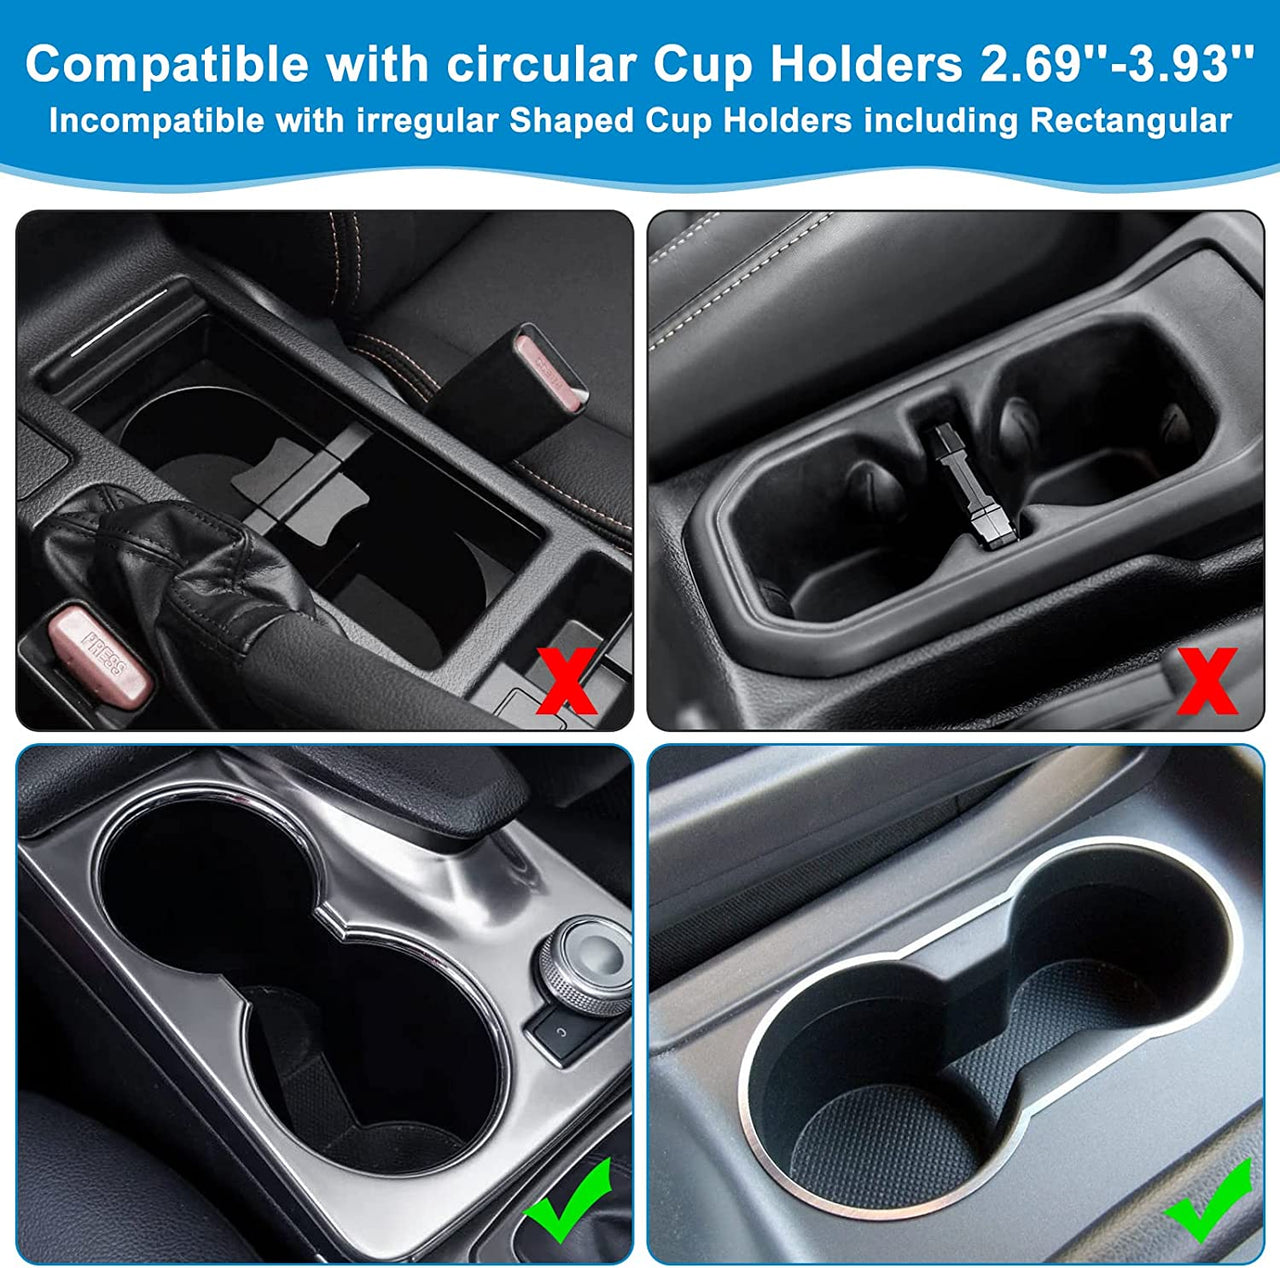 2-in-1 Car Cup Holder Expander Adapter with Adjustable Base, Custom Fit For Your Cars, Car Cup Holder Expander Organizer with Phone Holder, Fits 32/40 oz Drinks Bottles, Car Accessories TS15988